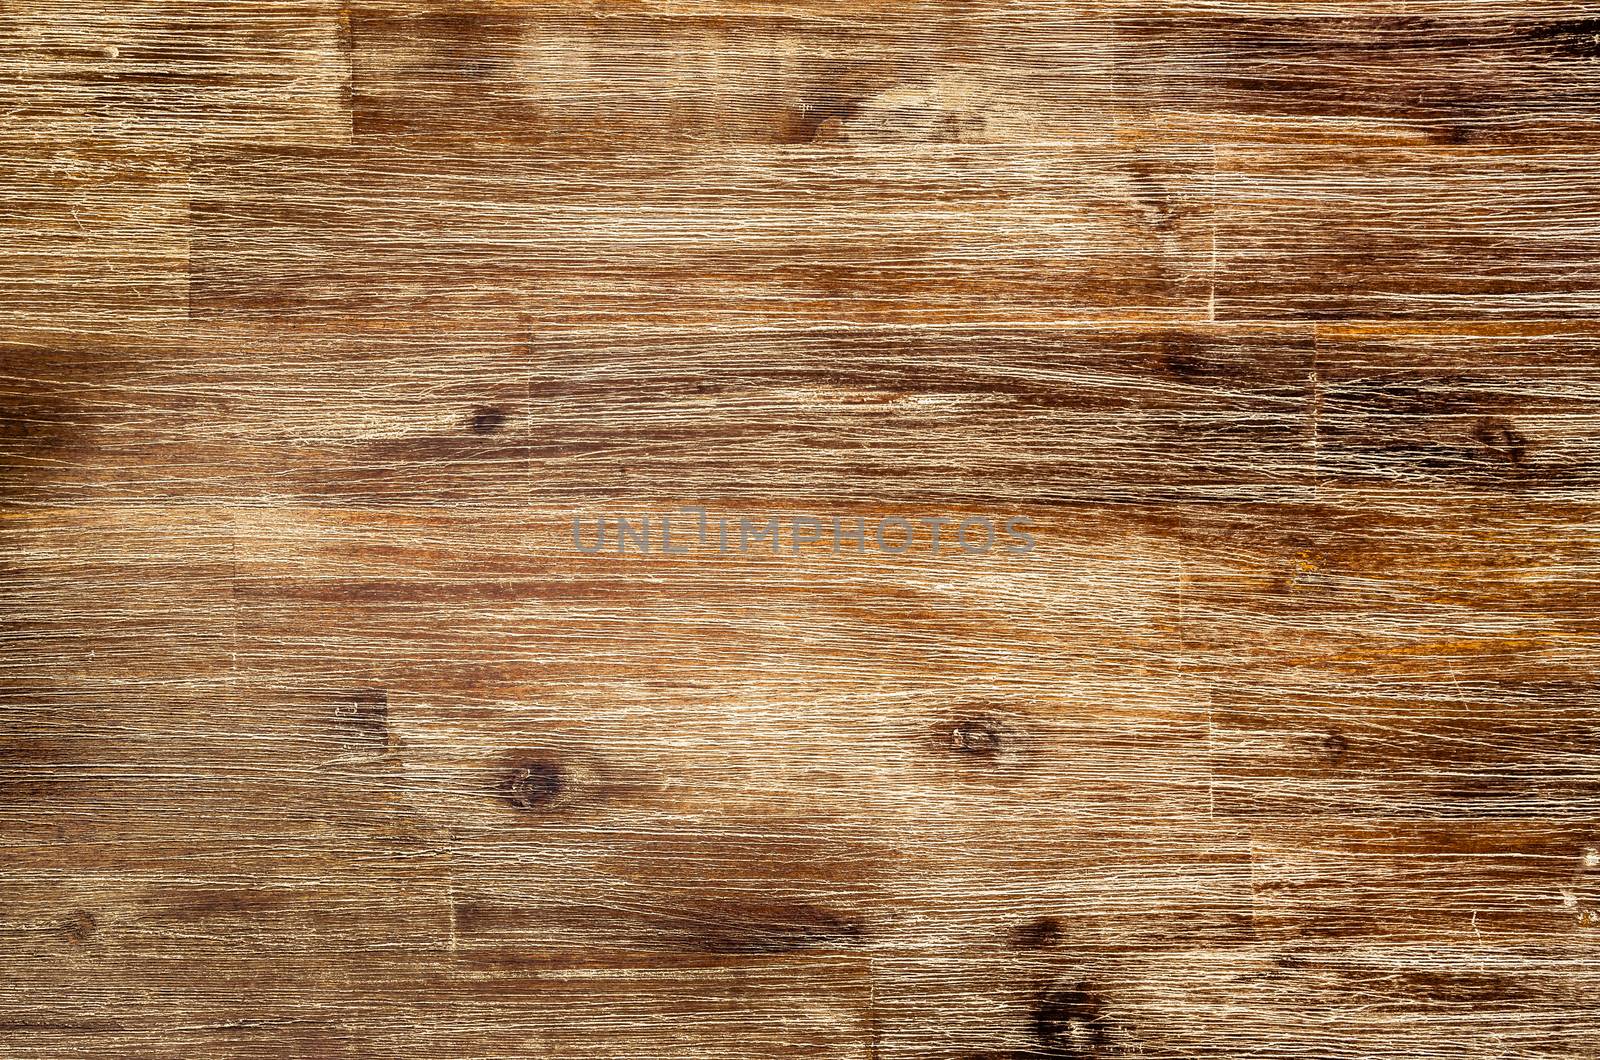 Wood texture background in vintage style by martinm303